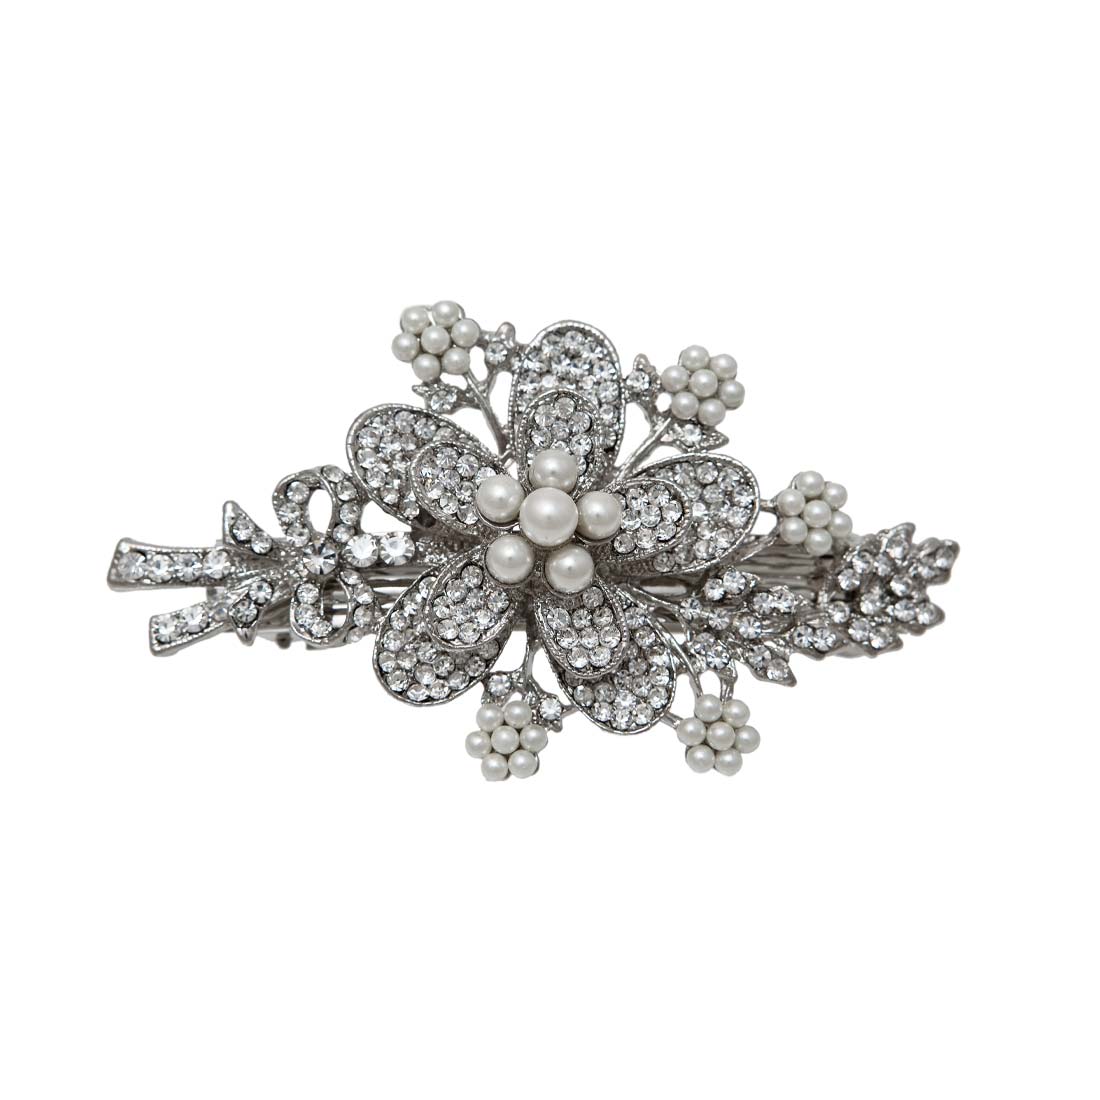 Pearls of Romance Flower Hair Clip with Barrette Fastening